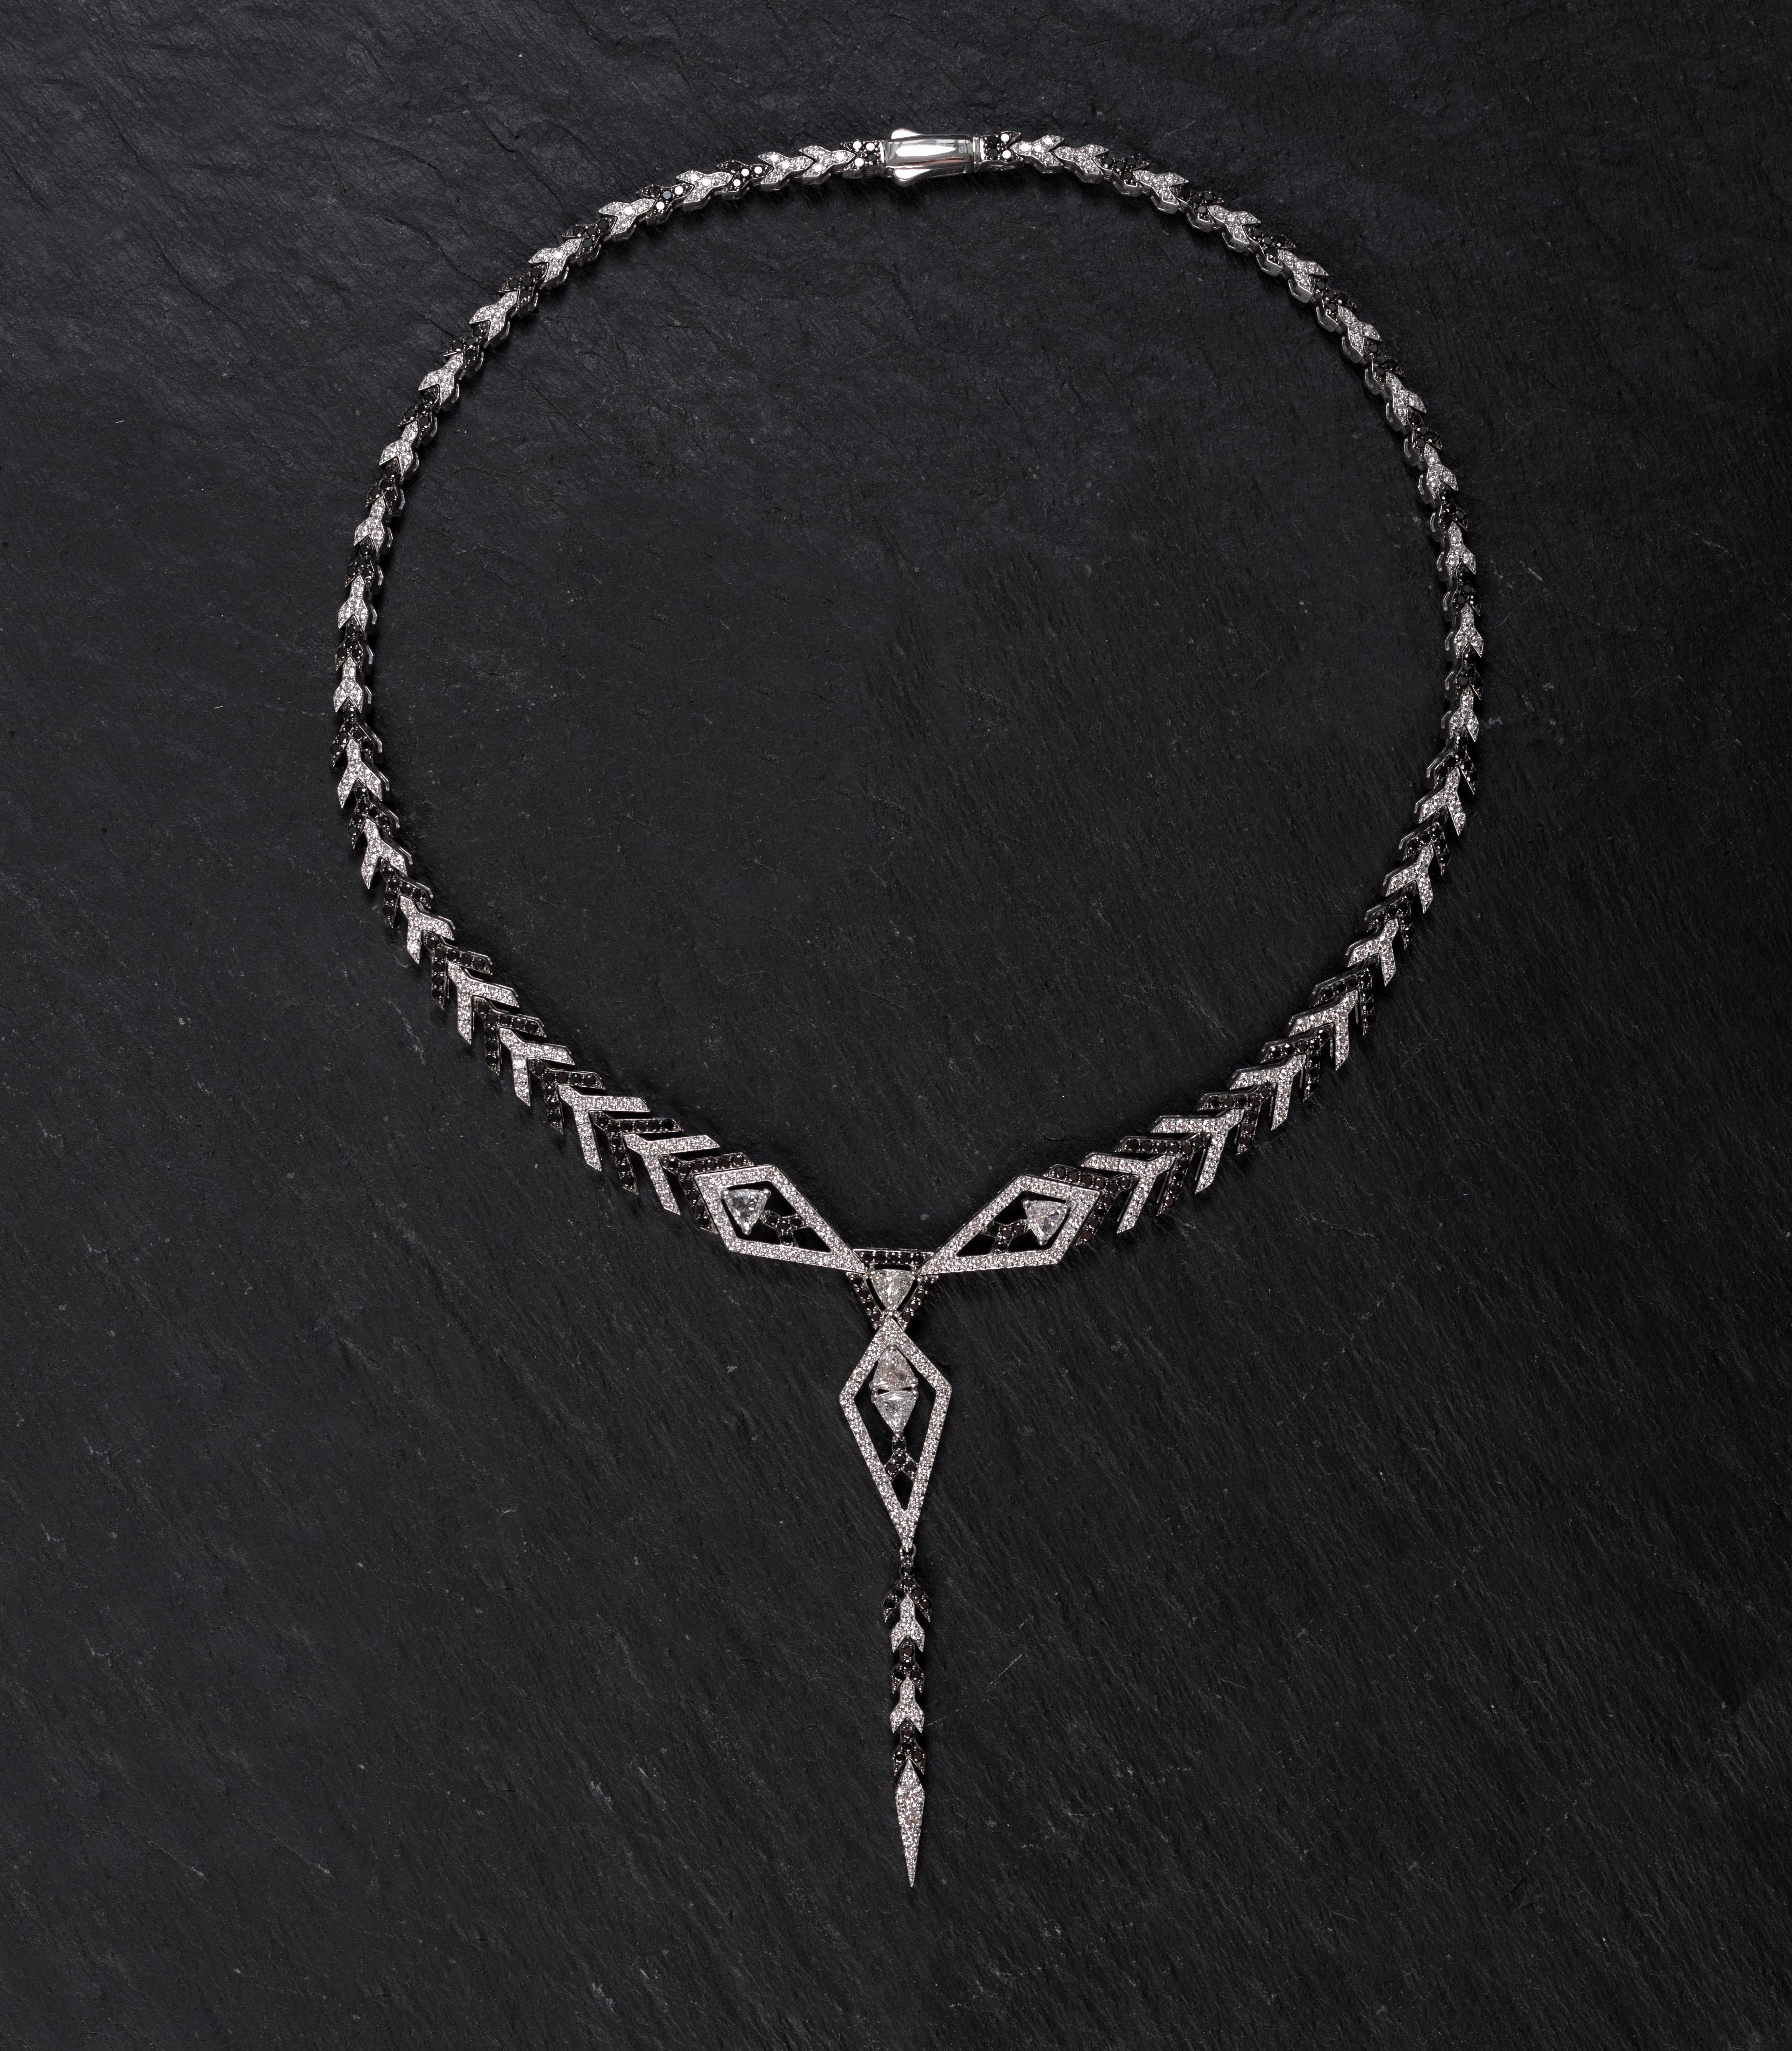 Contemporary 18K White Gold & 4.66 cts Black 5.56 cts White Diamonds Arrow Necklace by Alessa